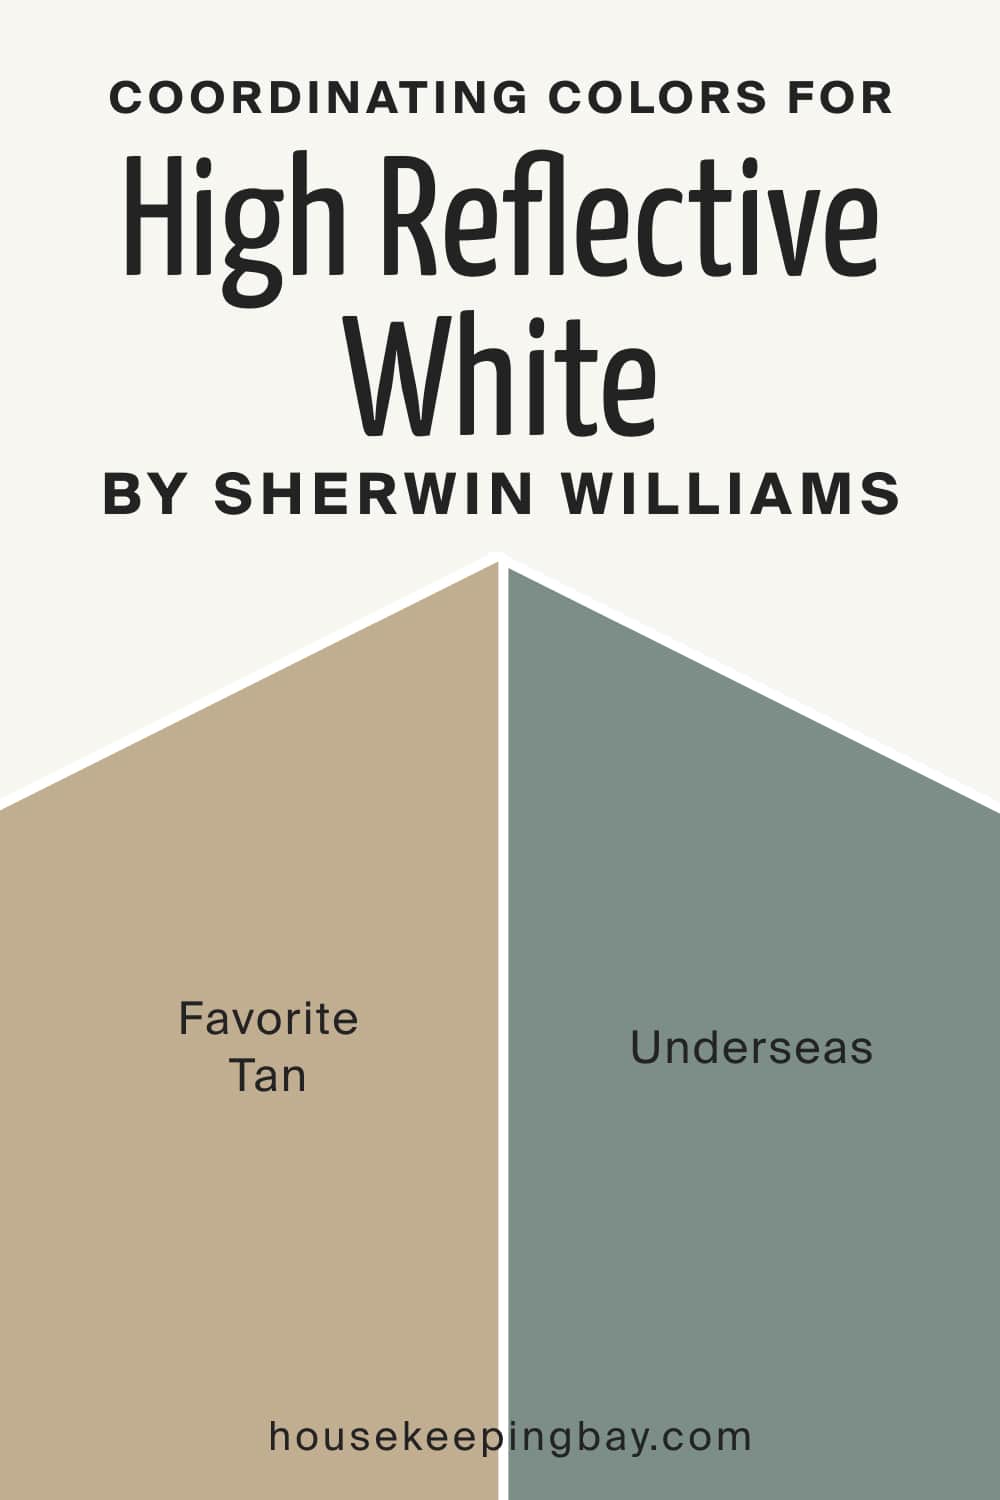 Coordinating Colors for High Reflective White SW 7757 by Sherwin Williams